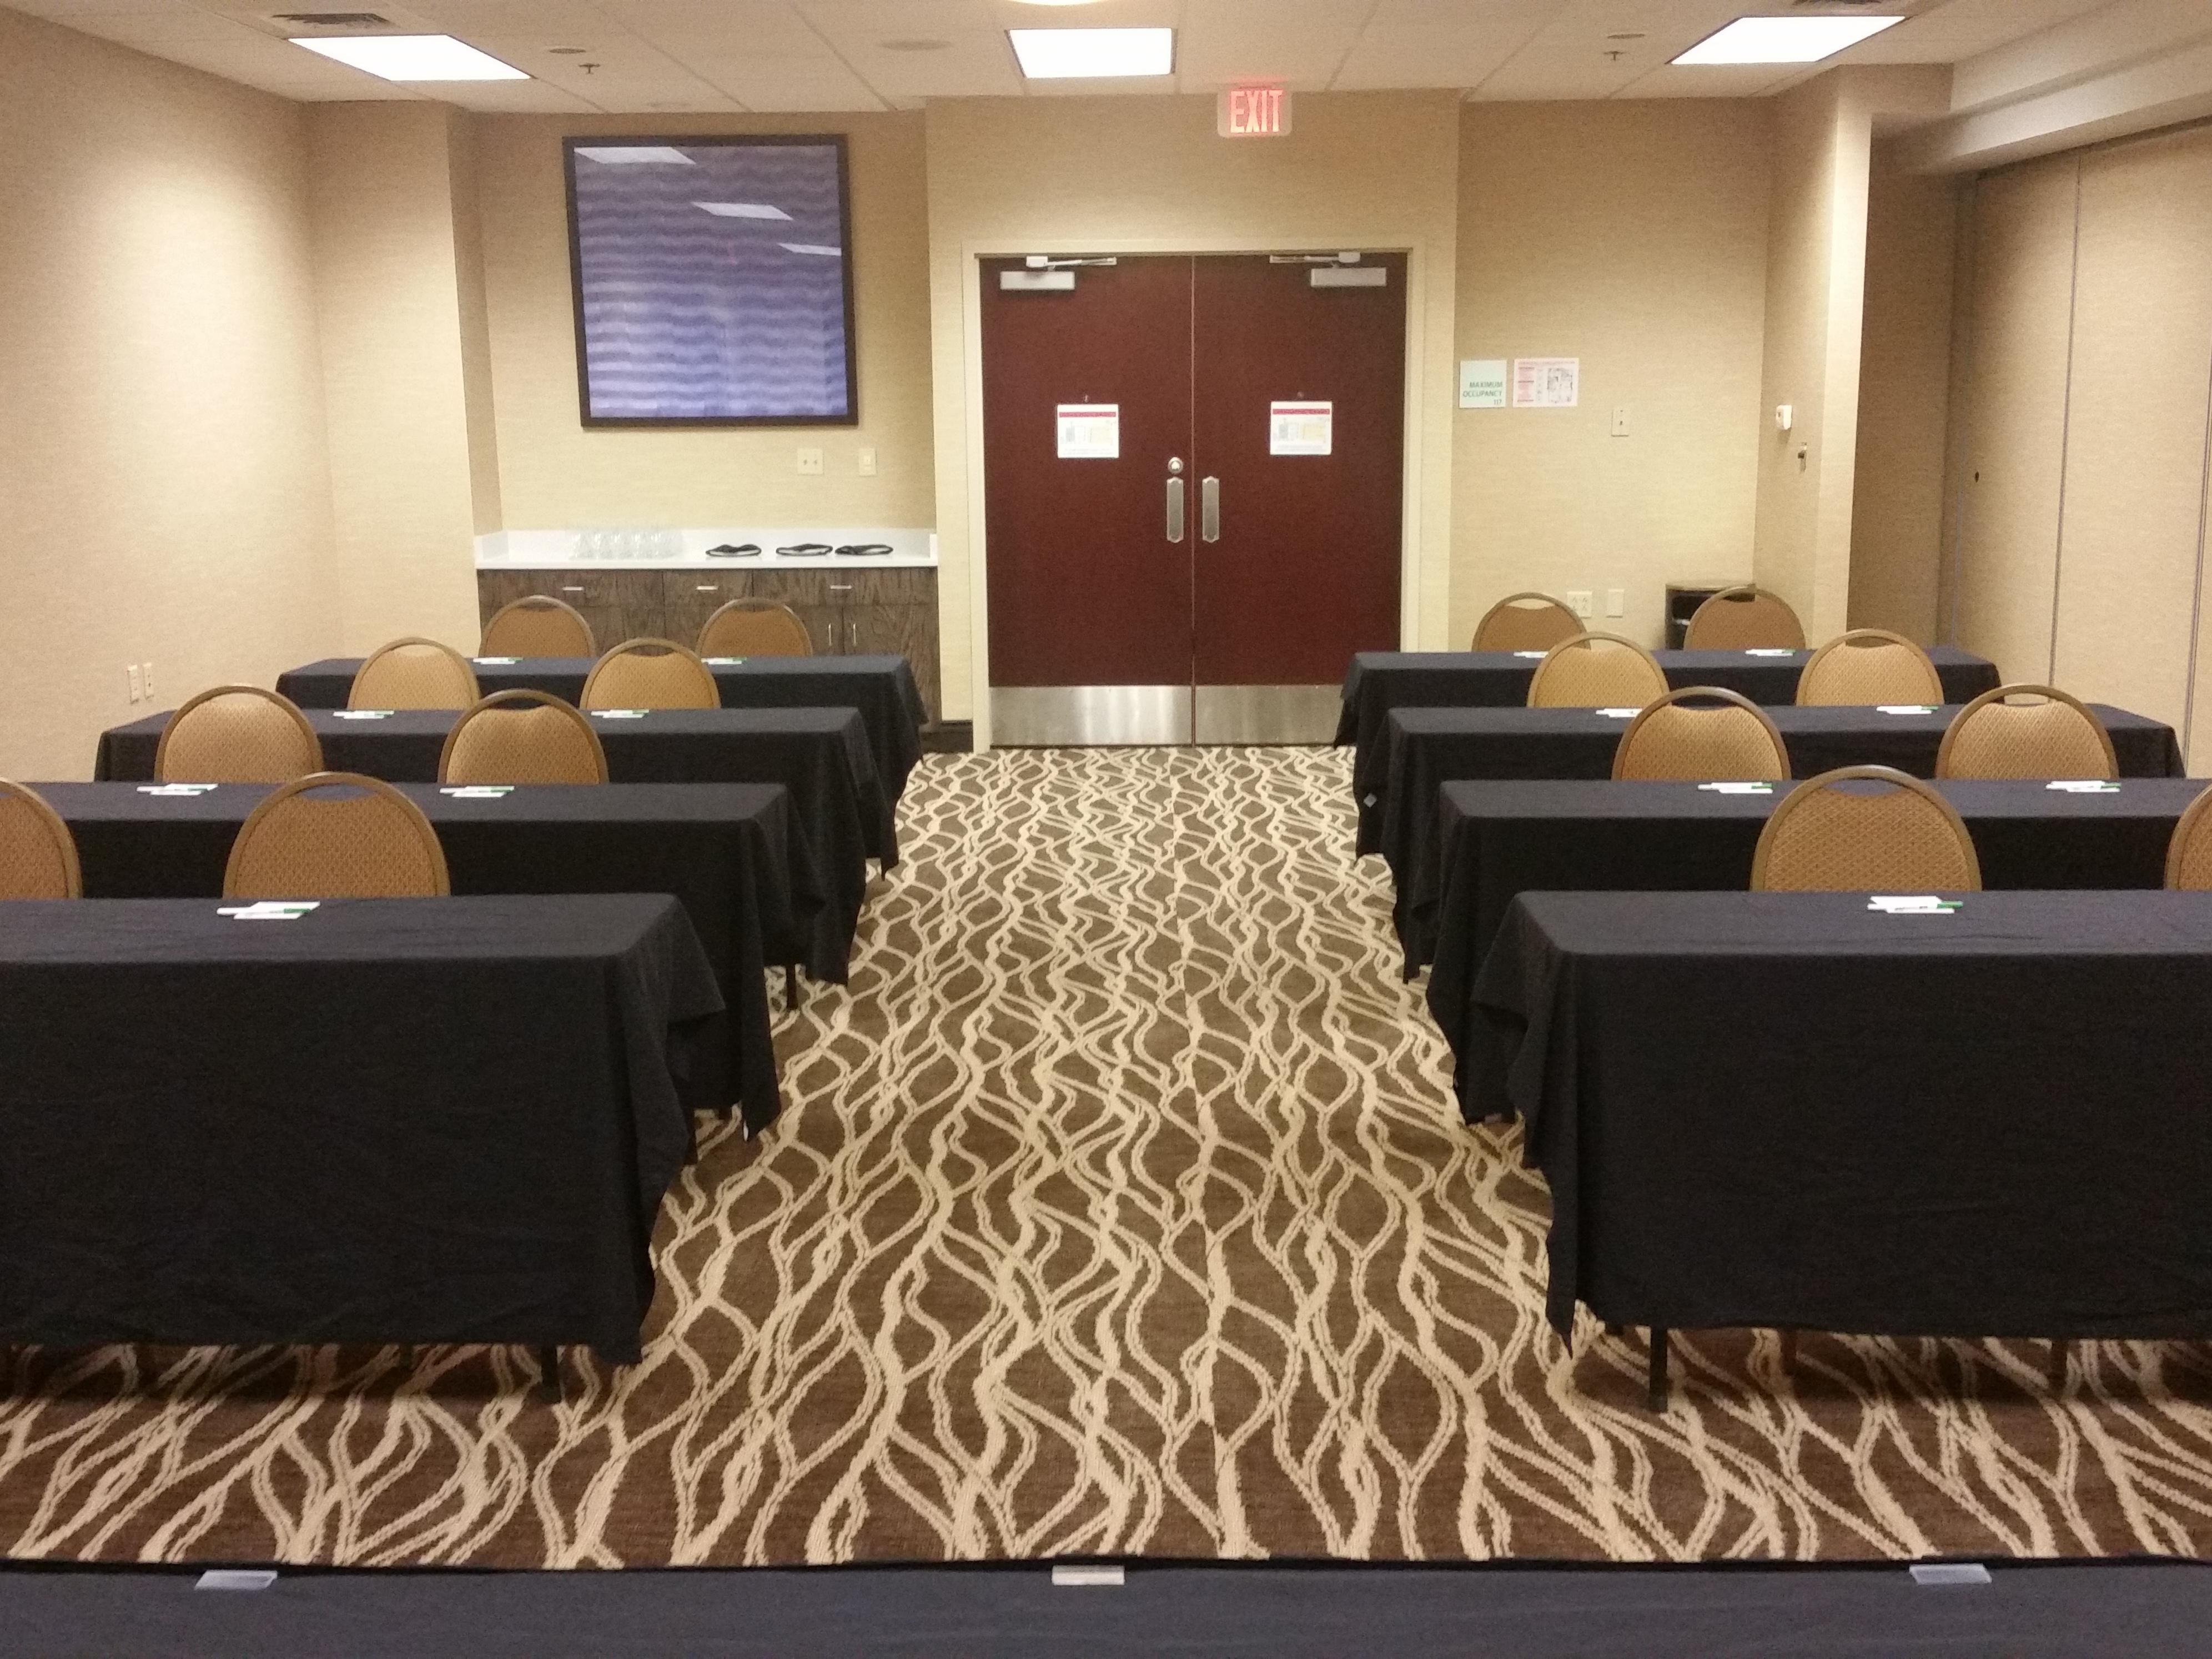 Anxious to host your next event? With over 3500 square feet of available meeting space, the Holiday Inn Presidential can handle your next corporate meeting or social event safely in accordance with the Arkansas Department of Health and the CDC recommended guidelines including six feet of social distance between attendees and frequent sanitizing pro